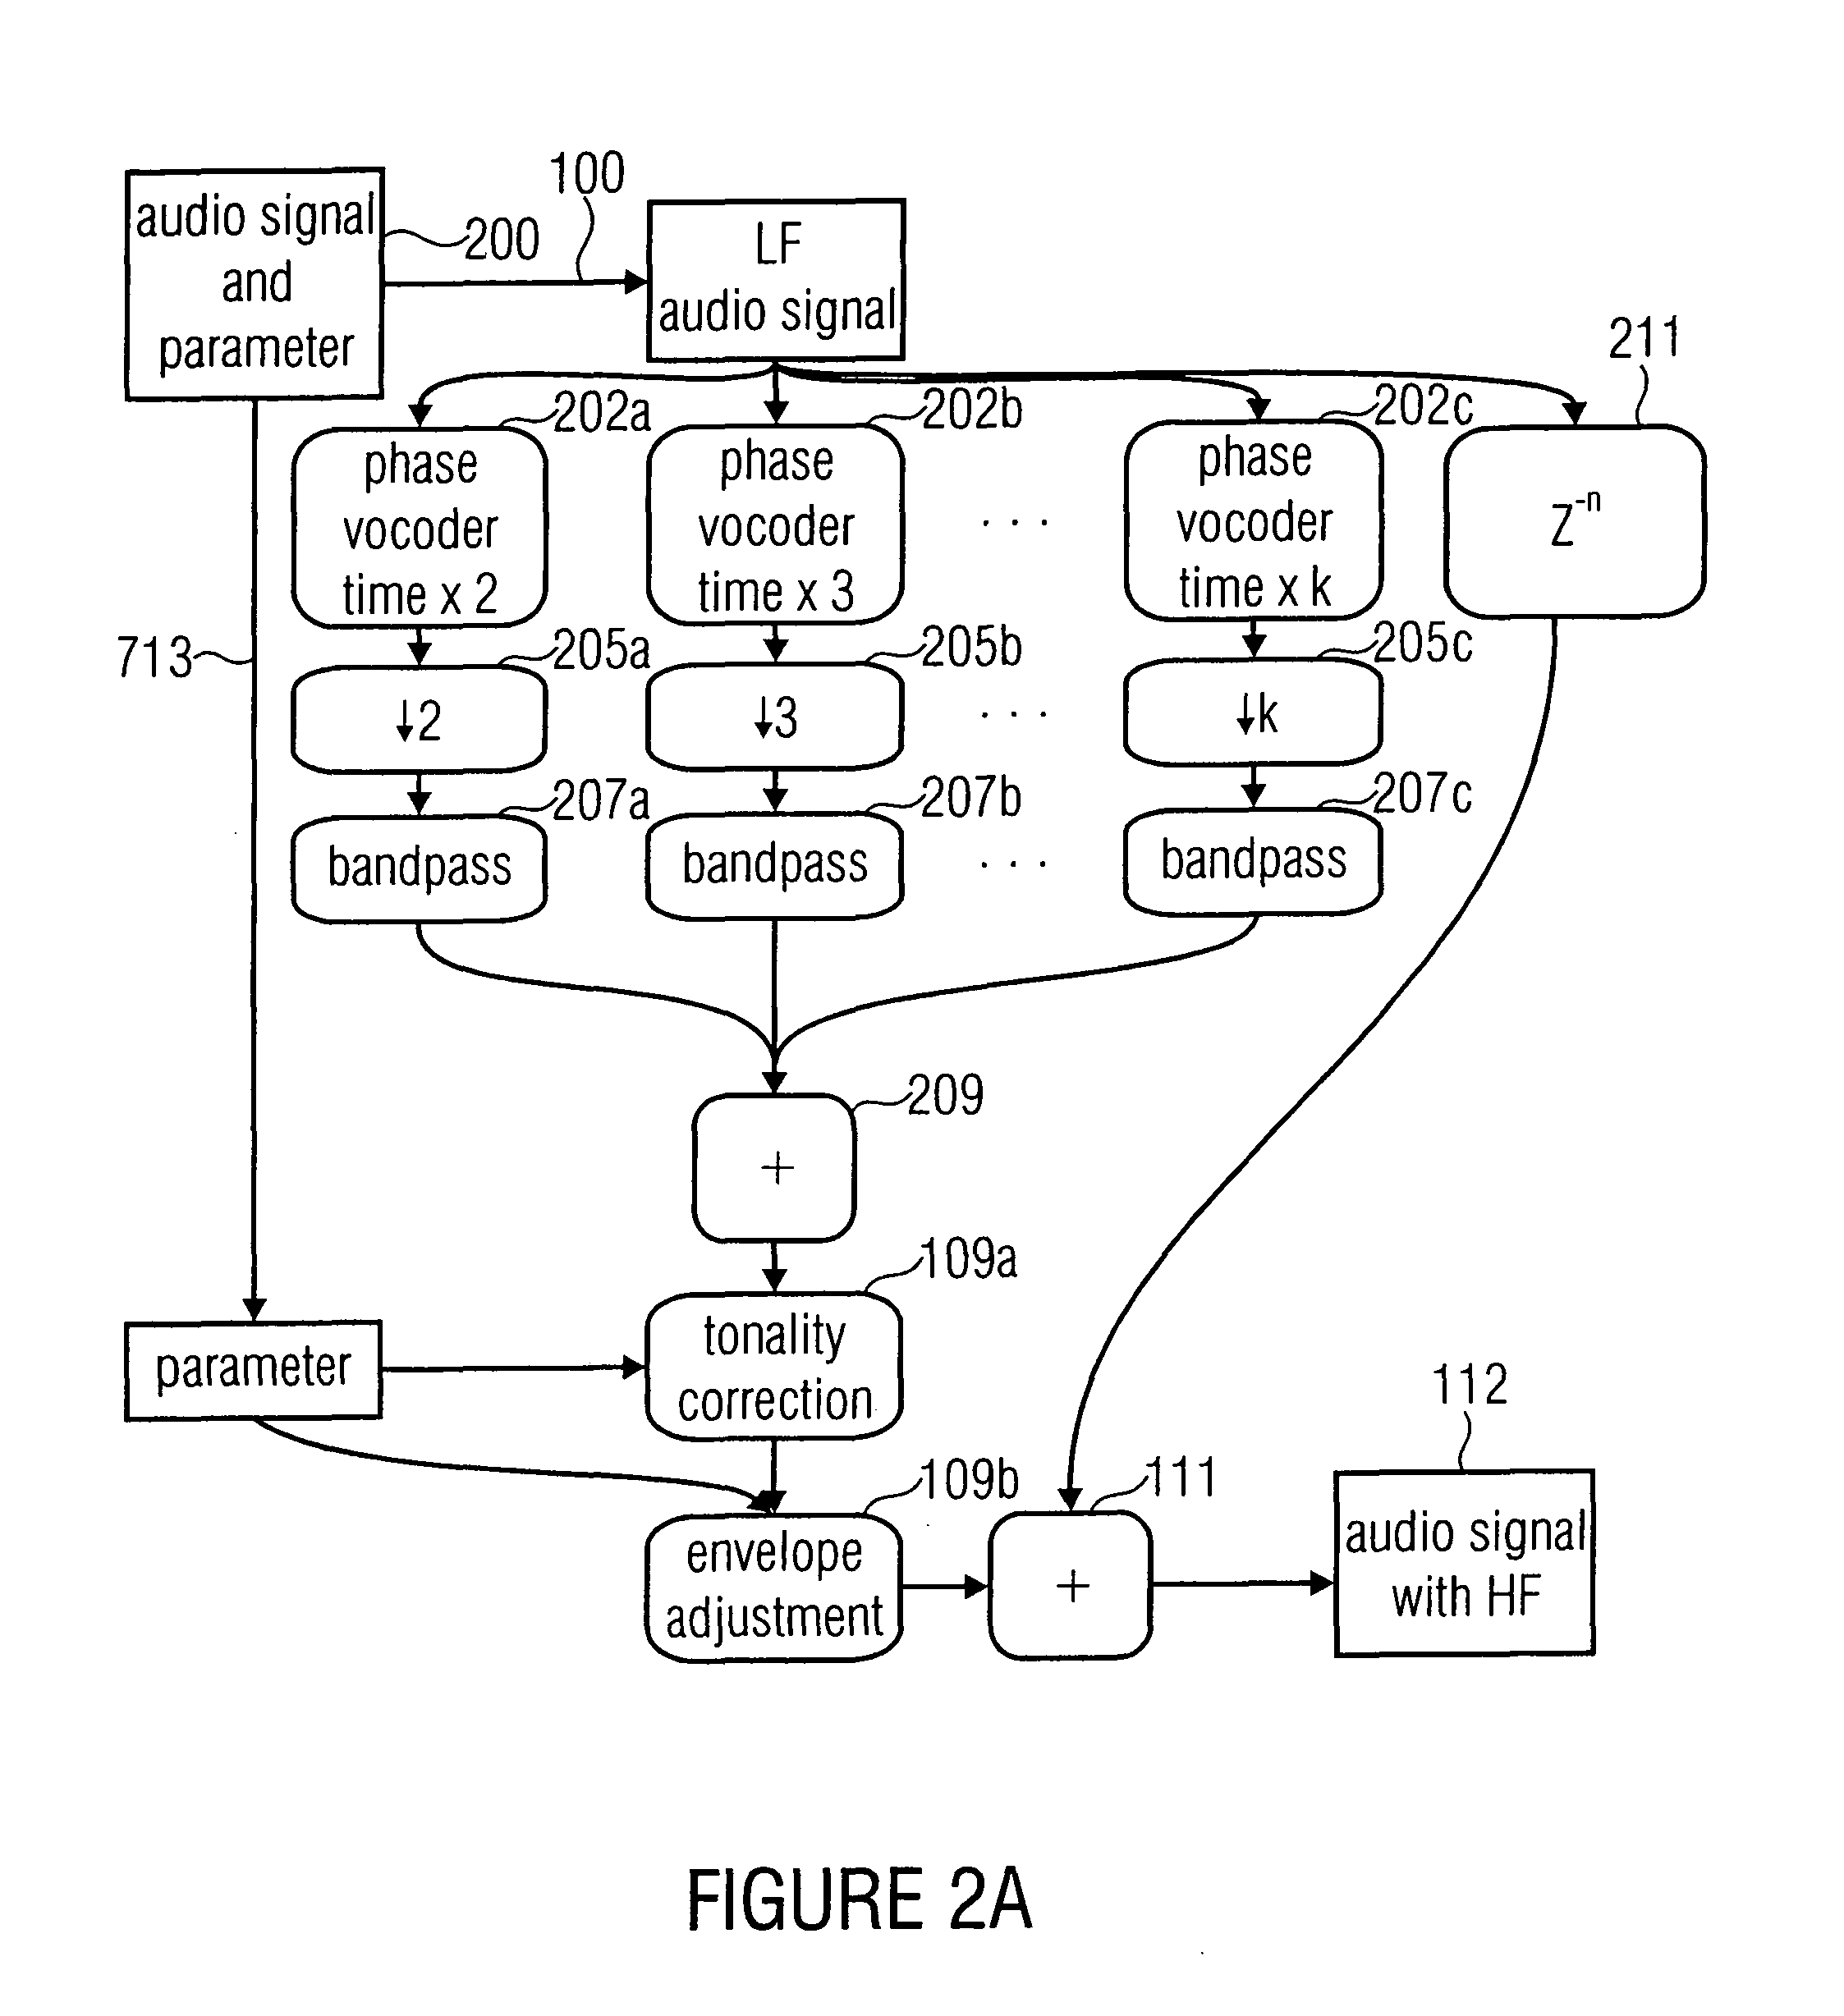 Device and Method for a Bandwidth Extension of an Audio Signal